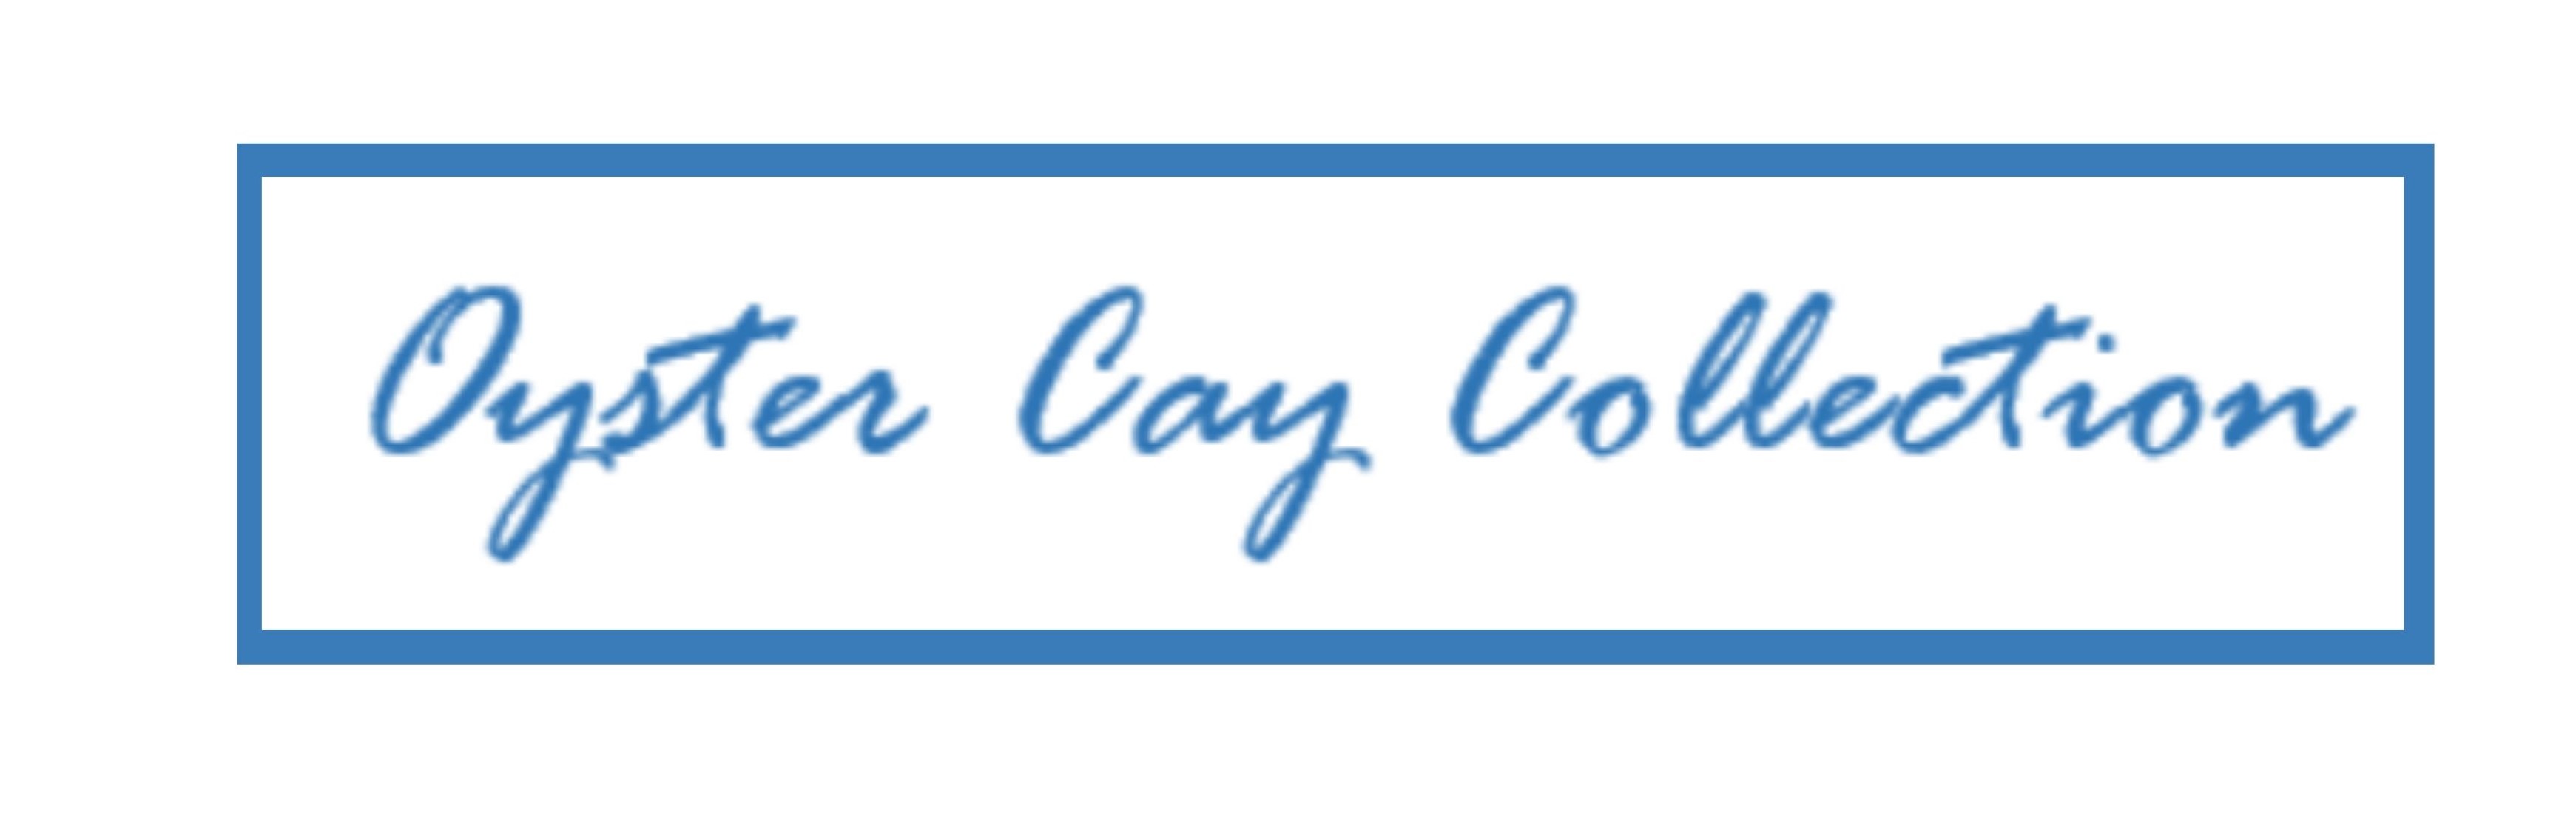 2.1 Gold Sponsor - Oyster Cay Collection